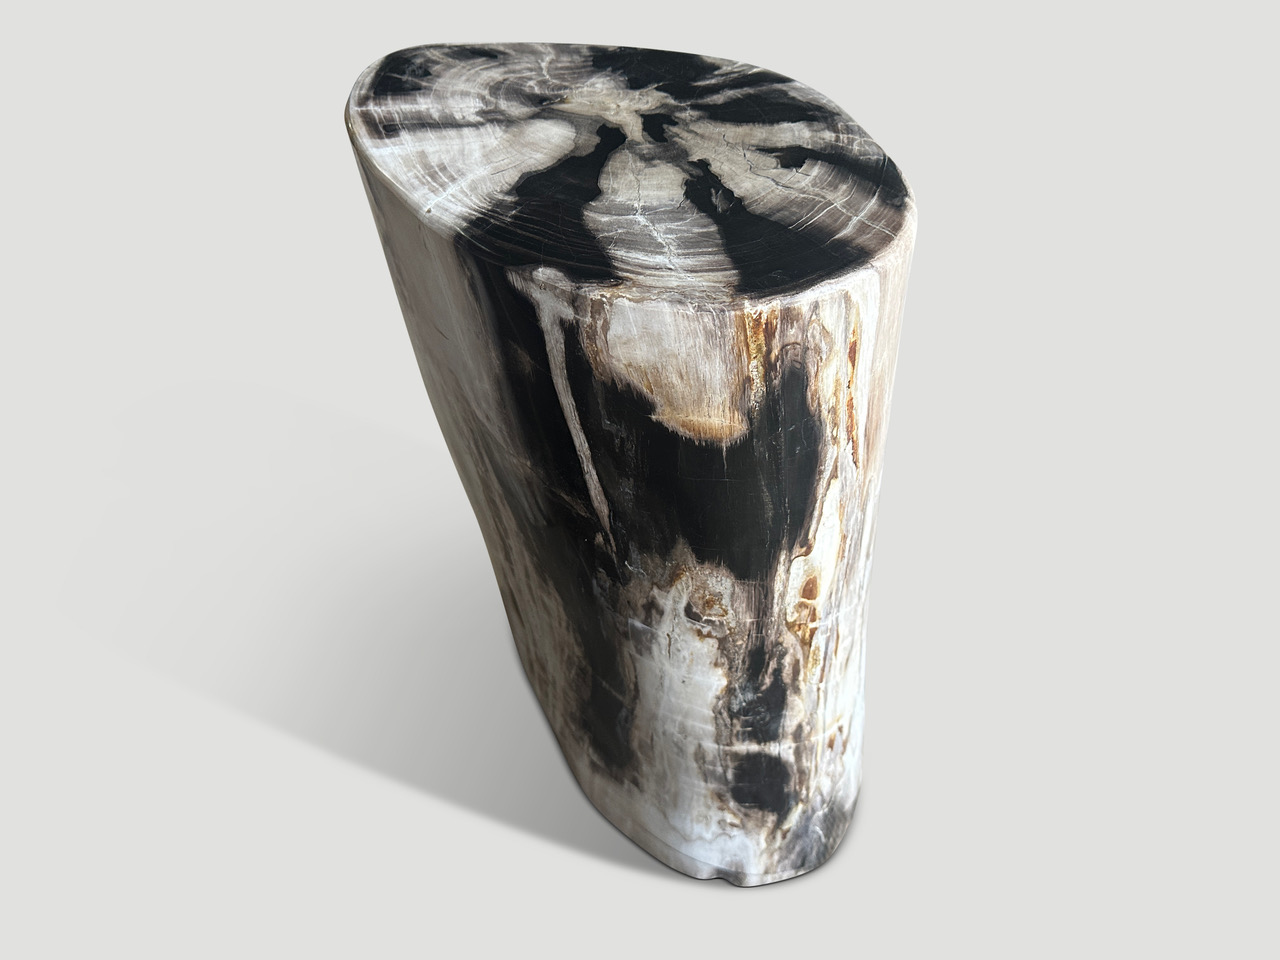 high quality super smooth, tall petrified wood side table or pedestal